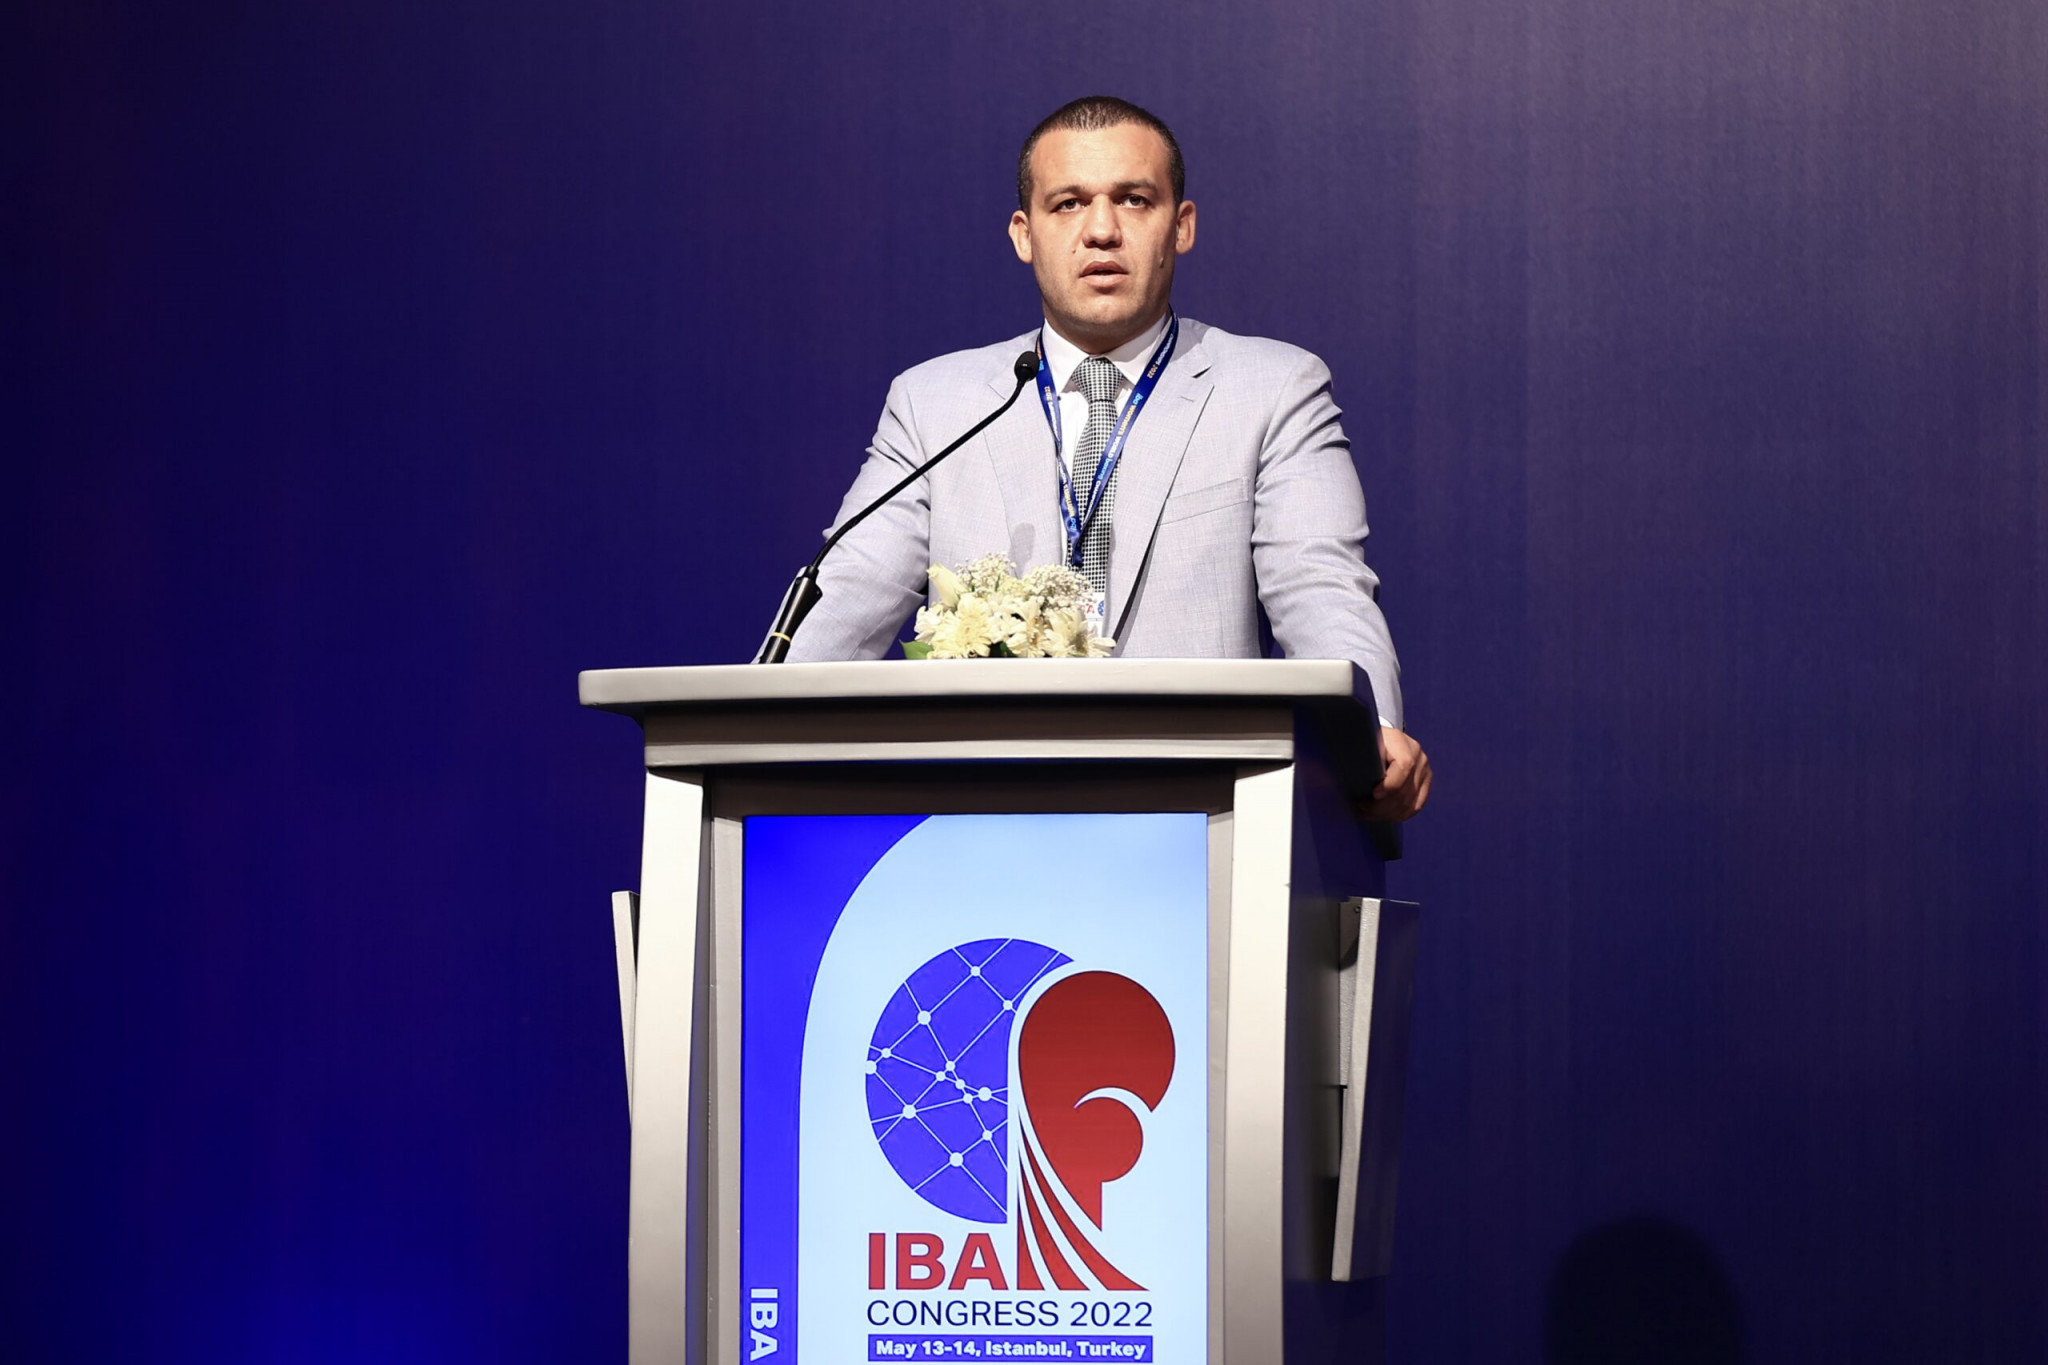 IBA President Umar Kremlev was re-elected unopposed but is now set to face Boris van der Vorst in another election ©IBA